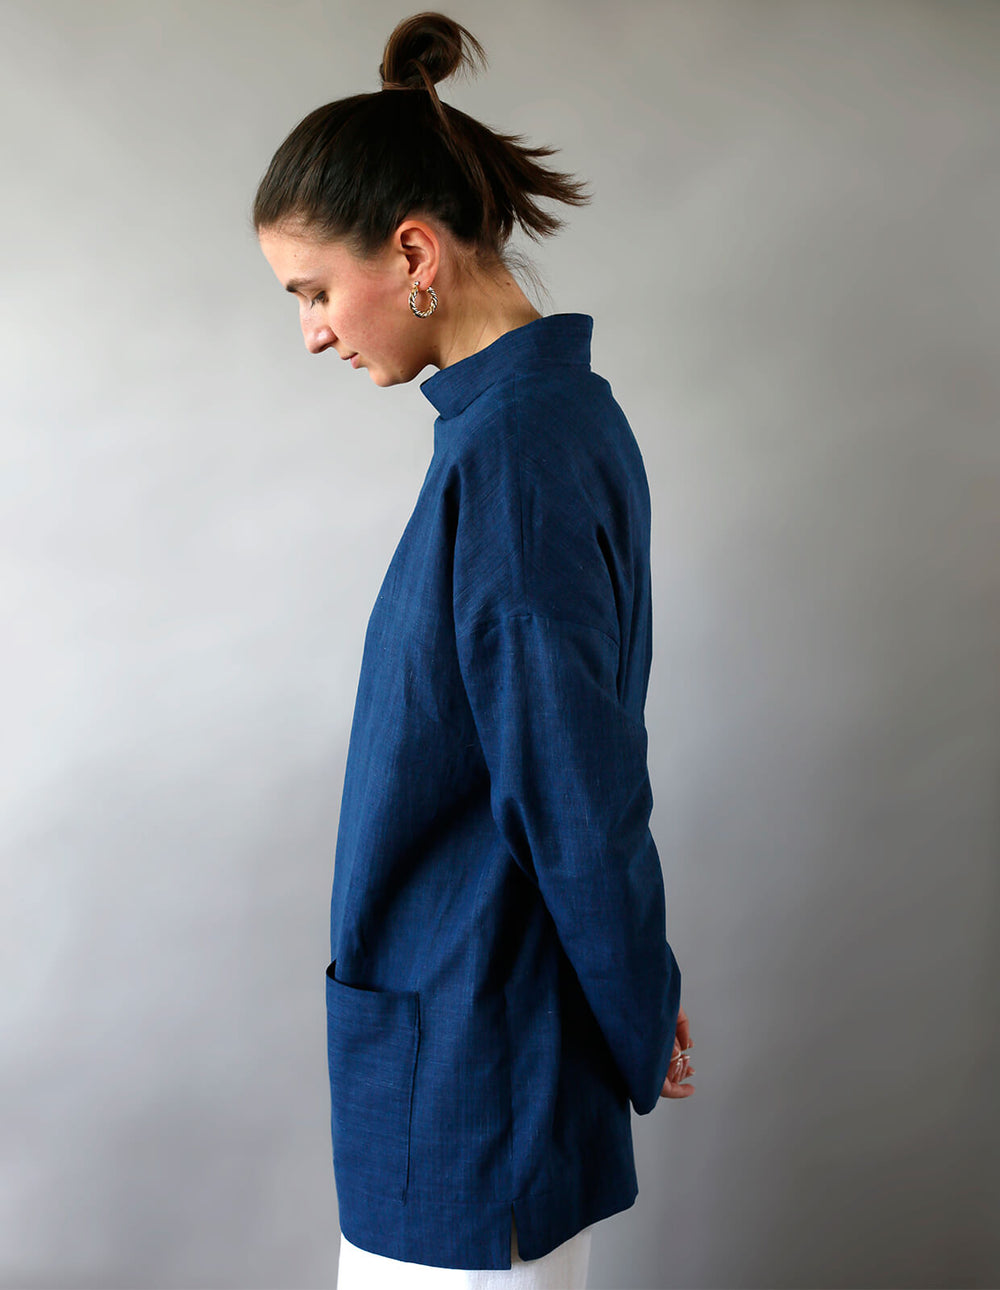 Woman wearing the Maker's Top sewing pattern from The Maker's Atelier on The Fold Line. A top pattern made in cotton, linen, denim, chambray, tencel, viscose or babycord fabrics, featuring a relaxed fit, stand collar, front patch pockets, full length slee